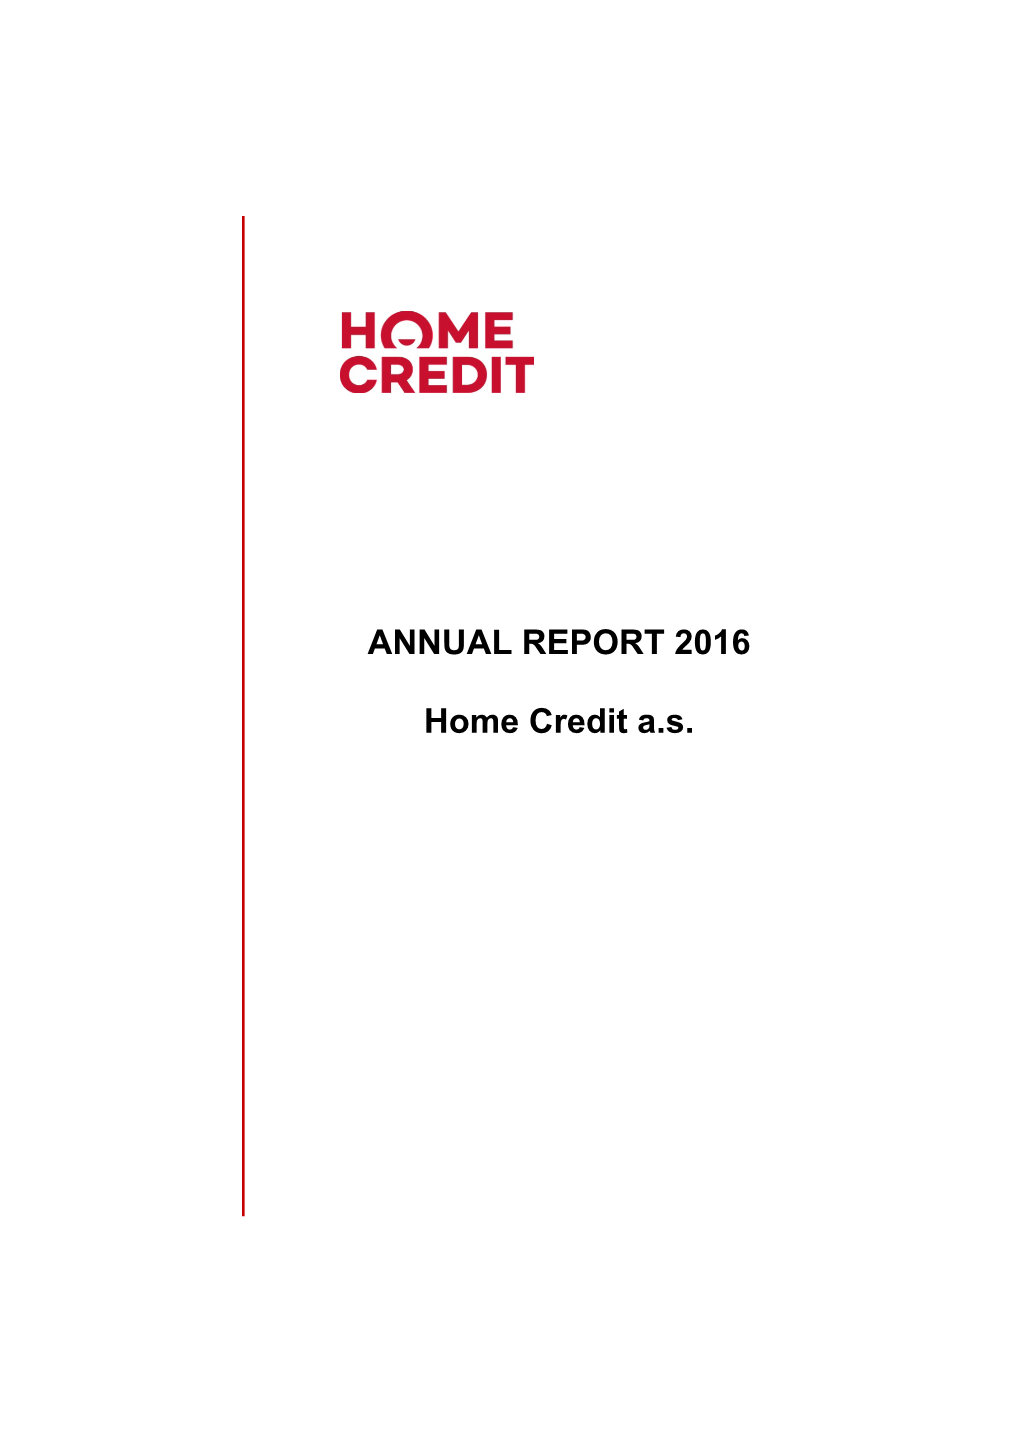 ANNUAL REPORT 2016 Home Credit A.S